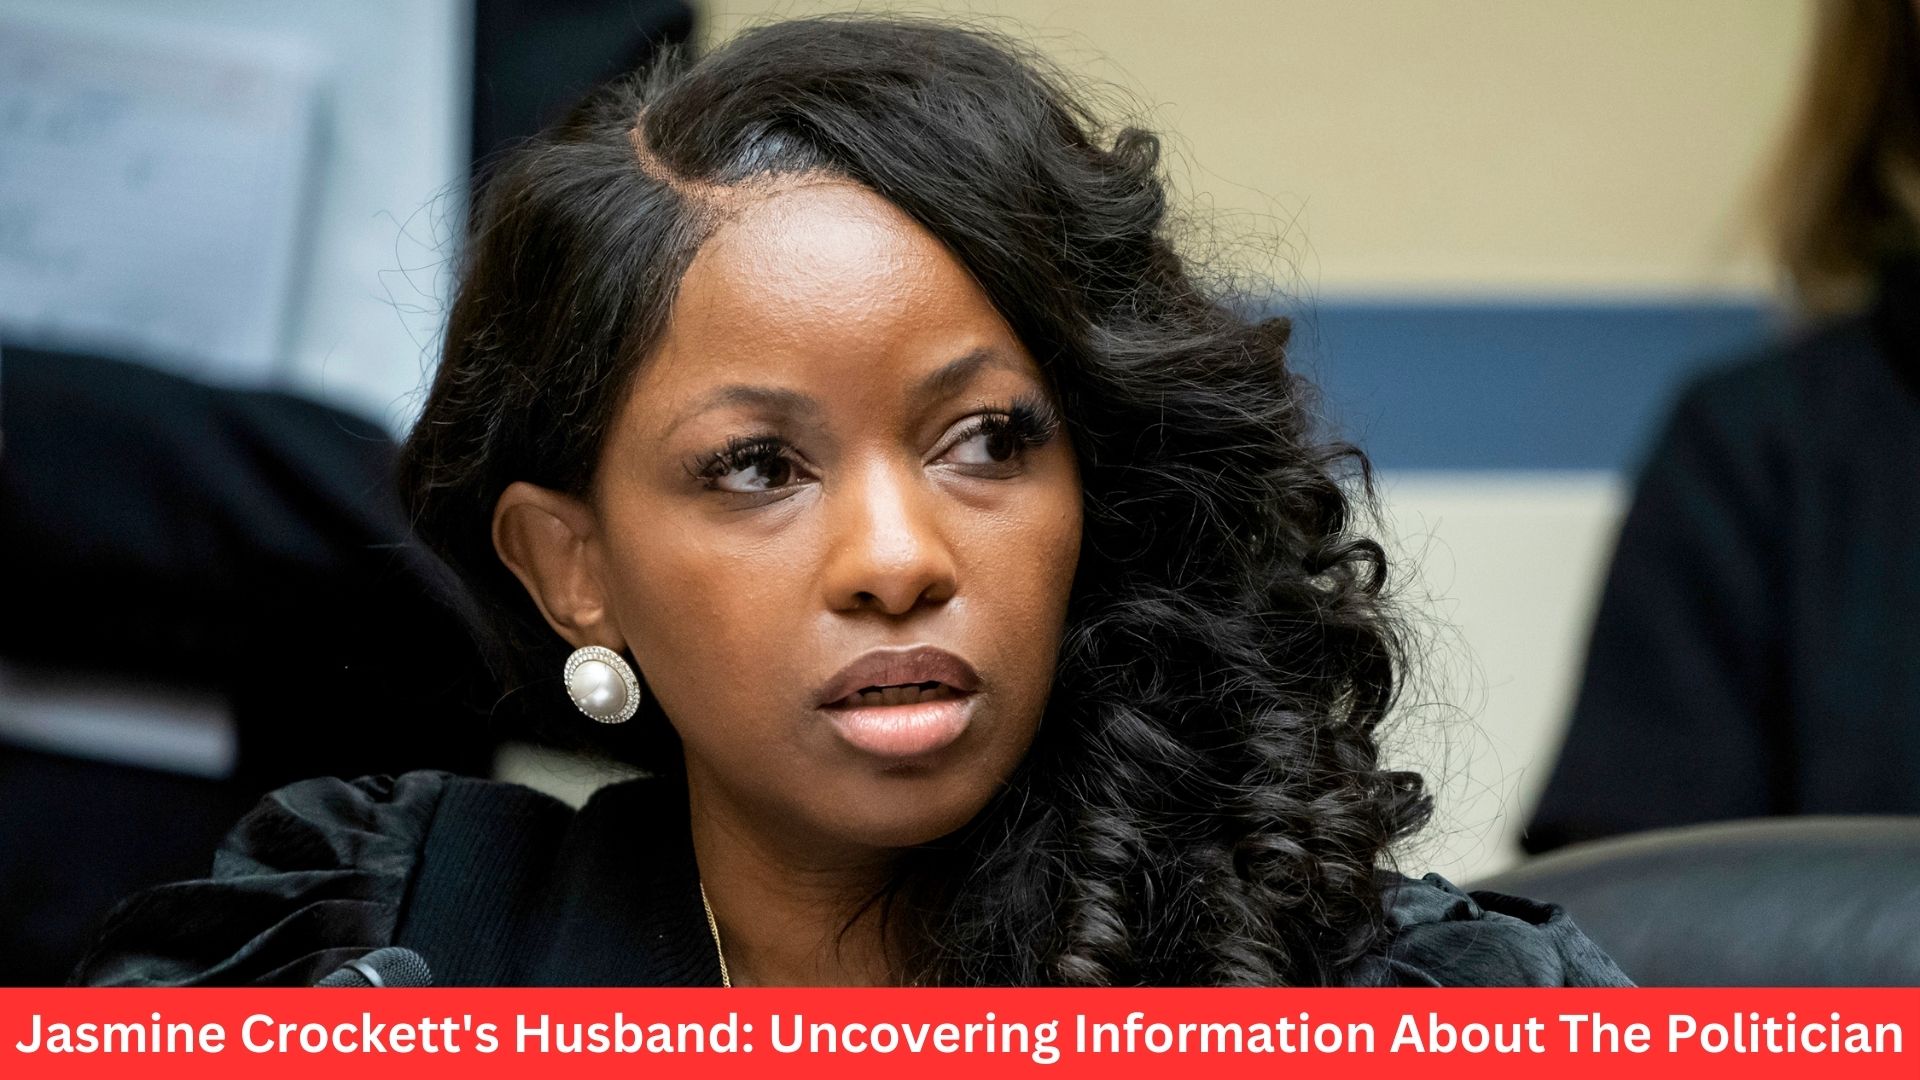 Jasmine Crockett's Husband: Uncovering Information About The Politician